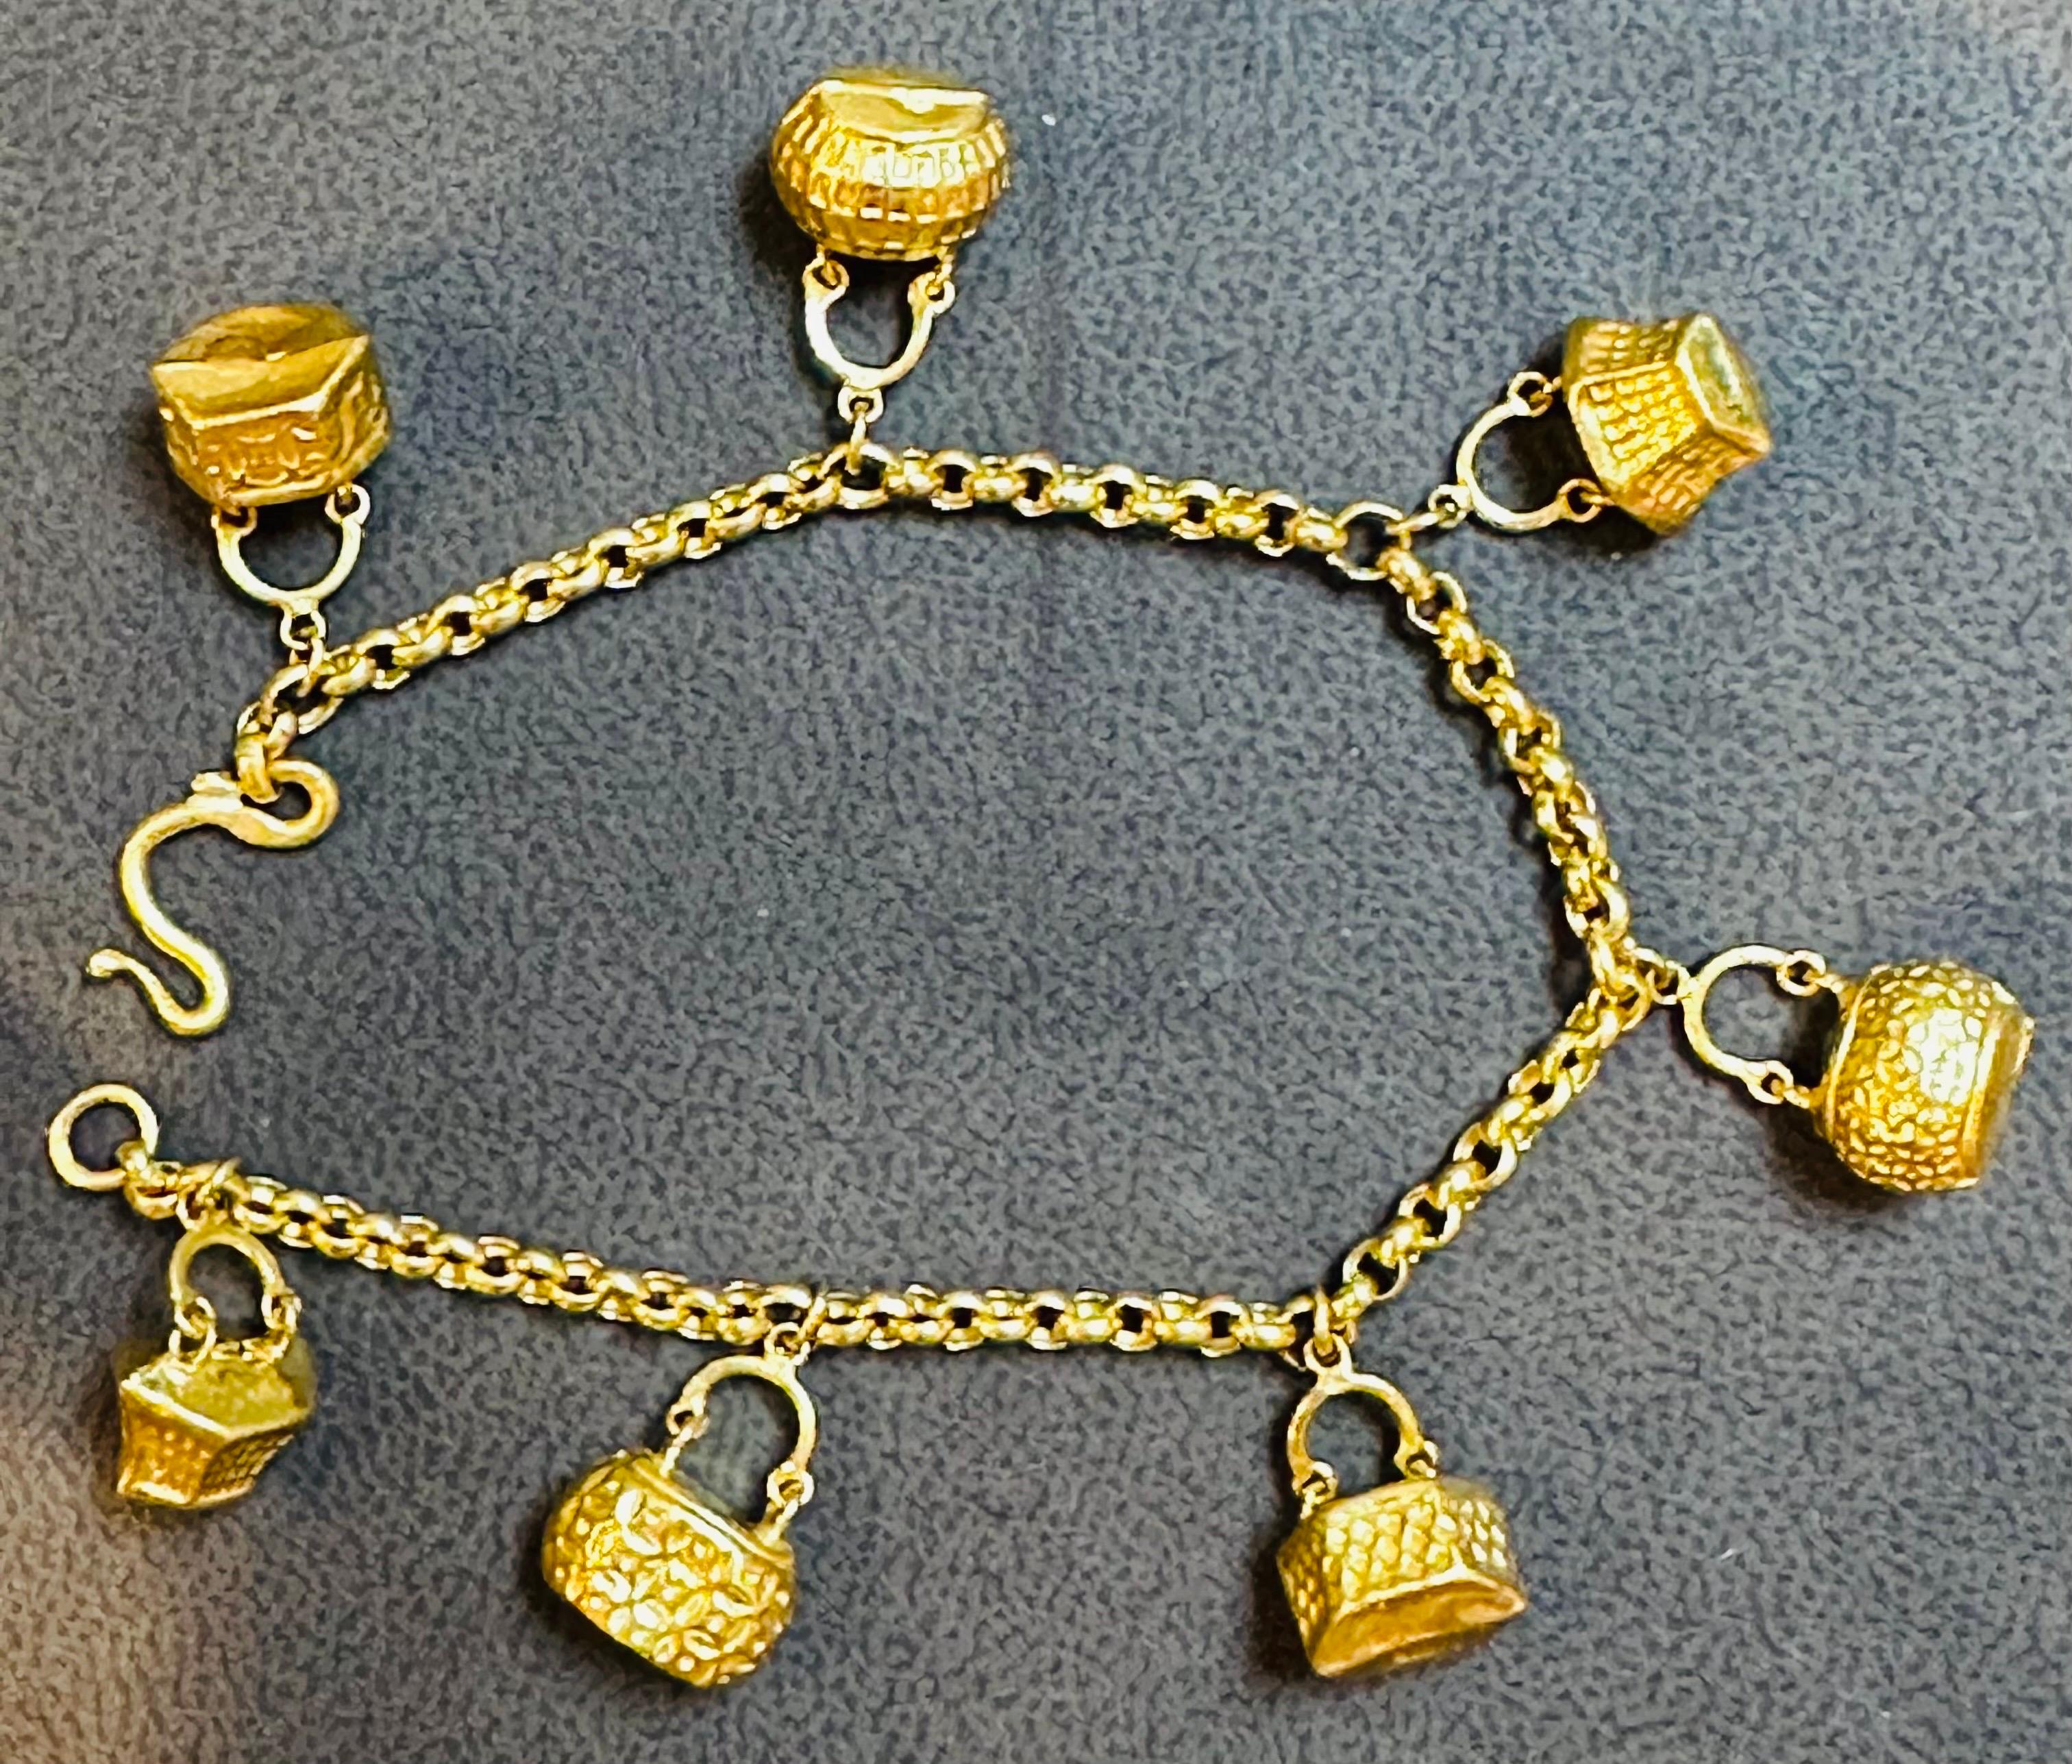 Women's 24 Karat Yellow Pure Gold 15.5 Gm Charm Bracelet with 7 Basket Charms For Sale